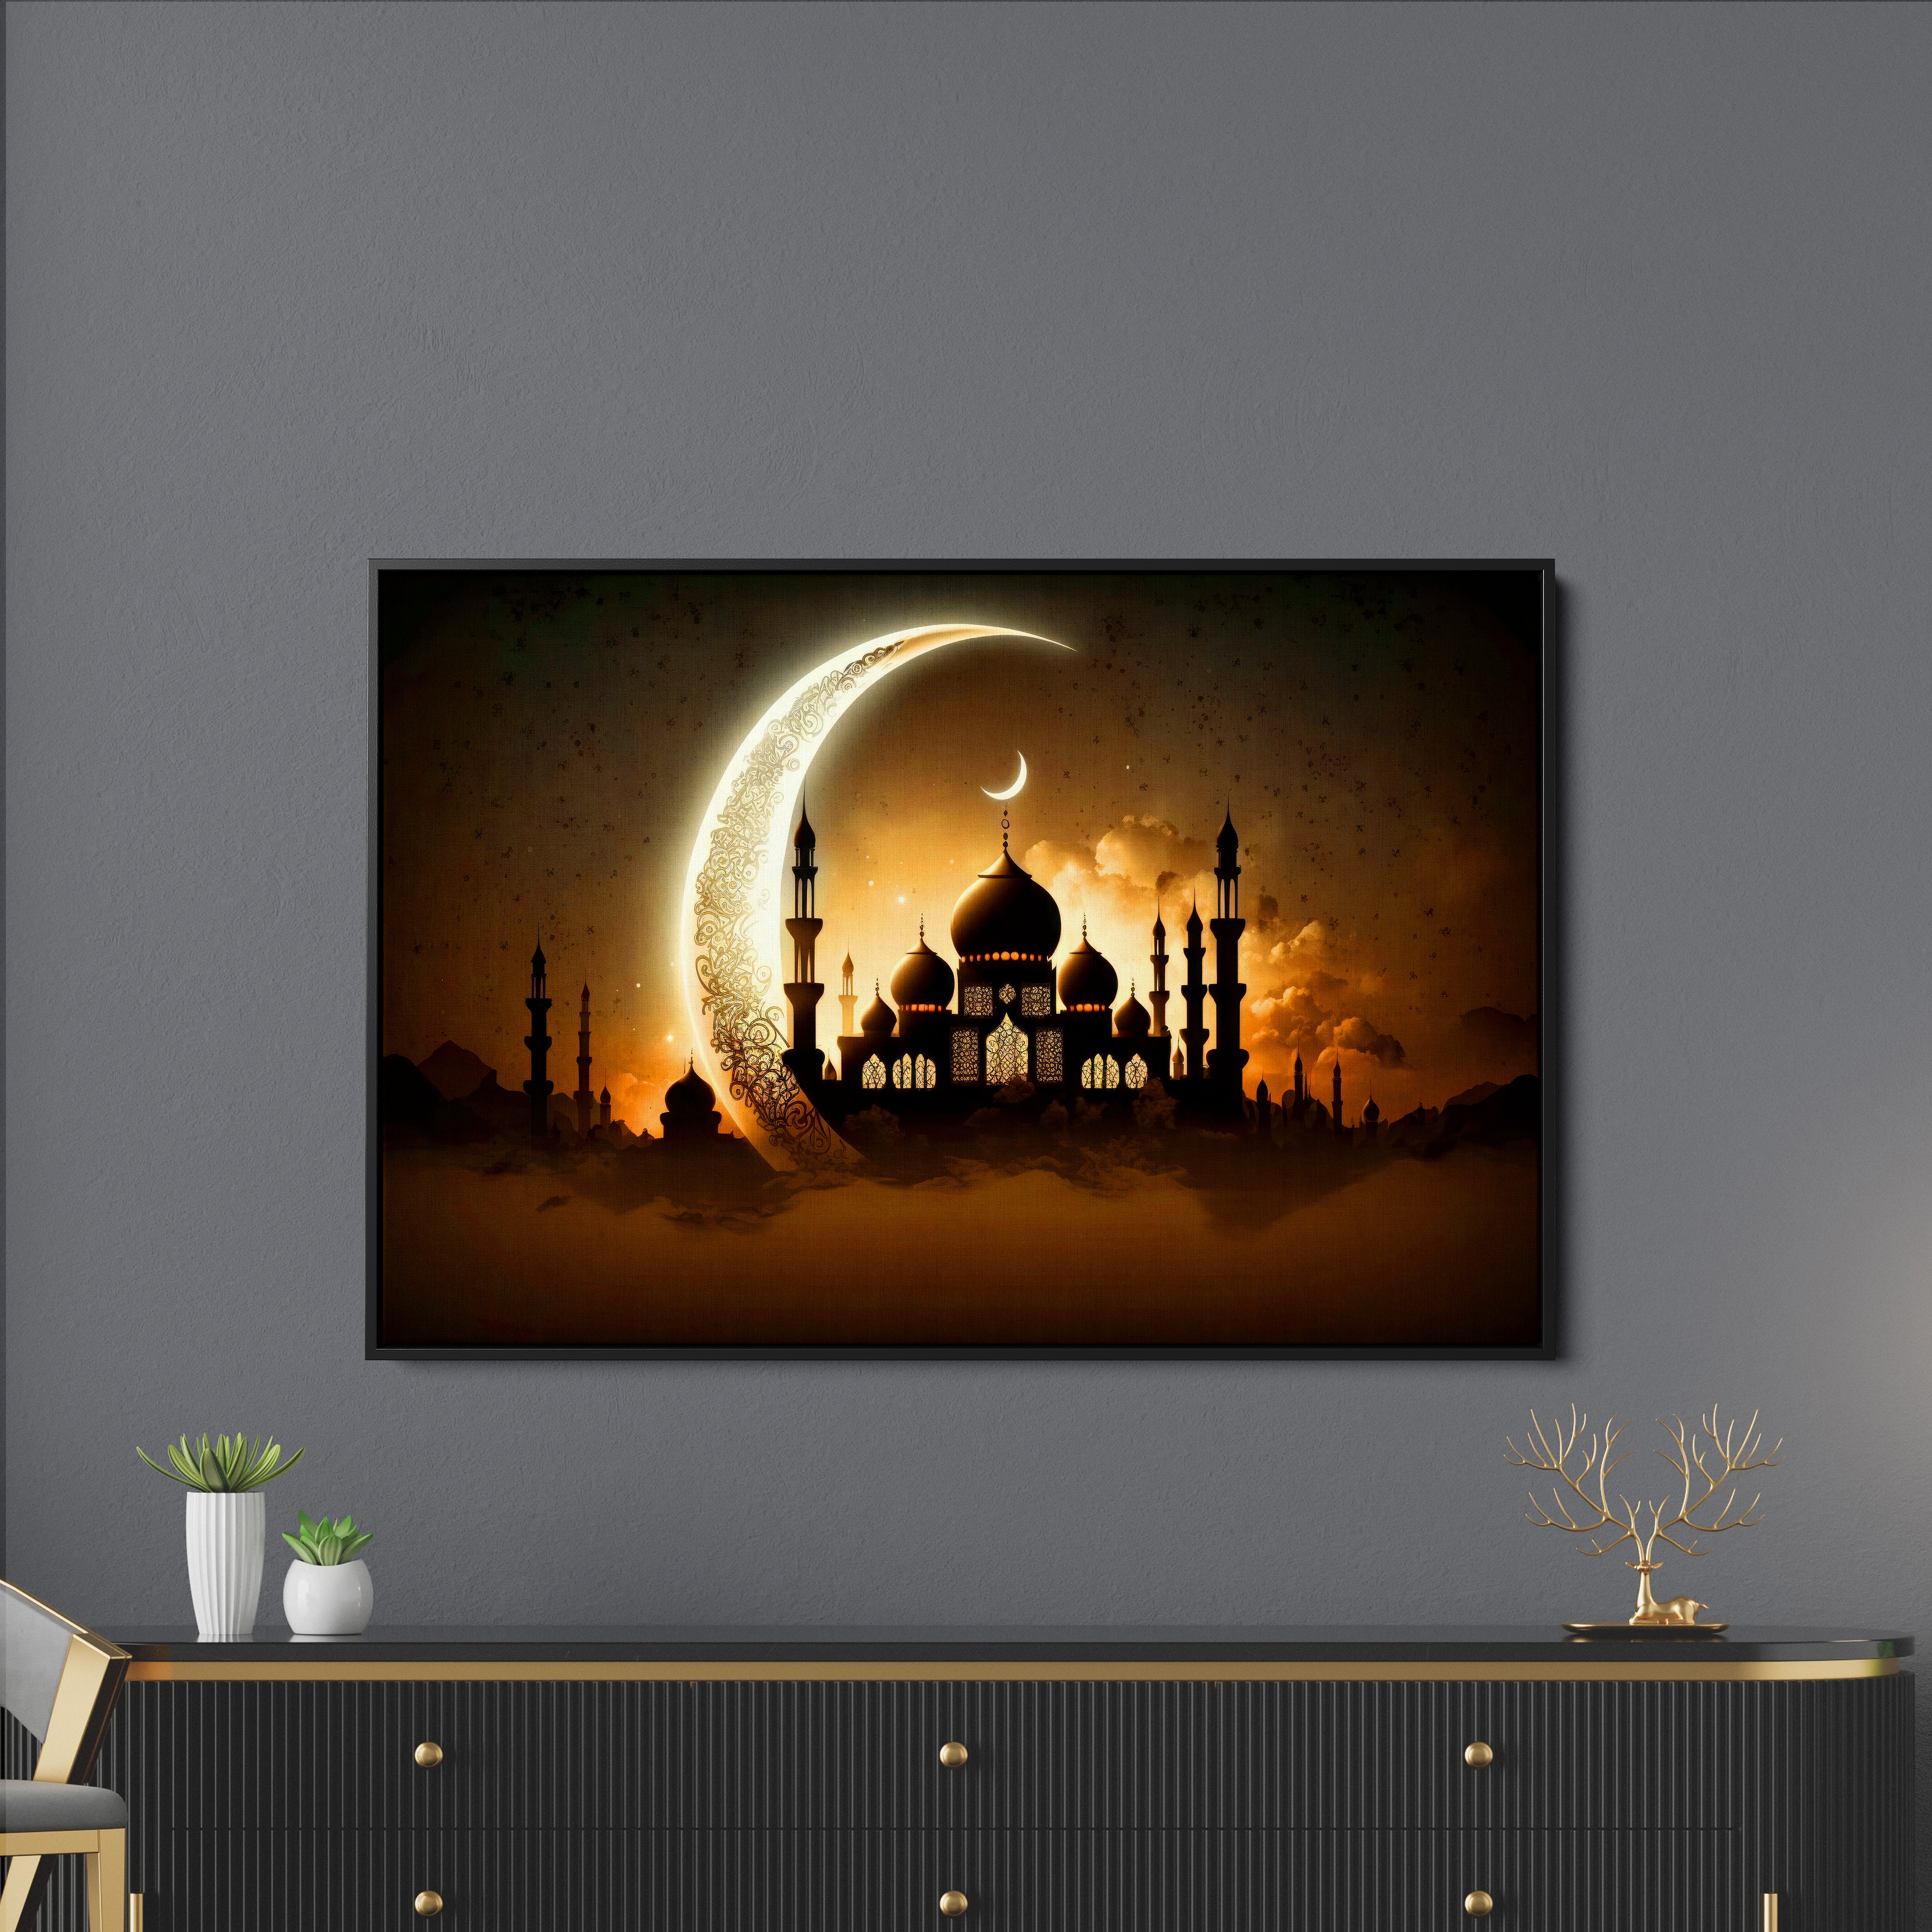 Islamic Mosque Morden Art Canvas Painting